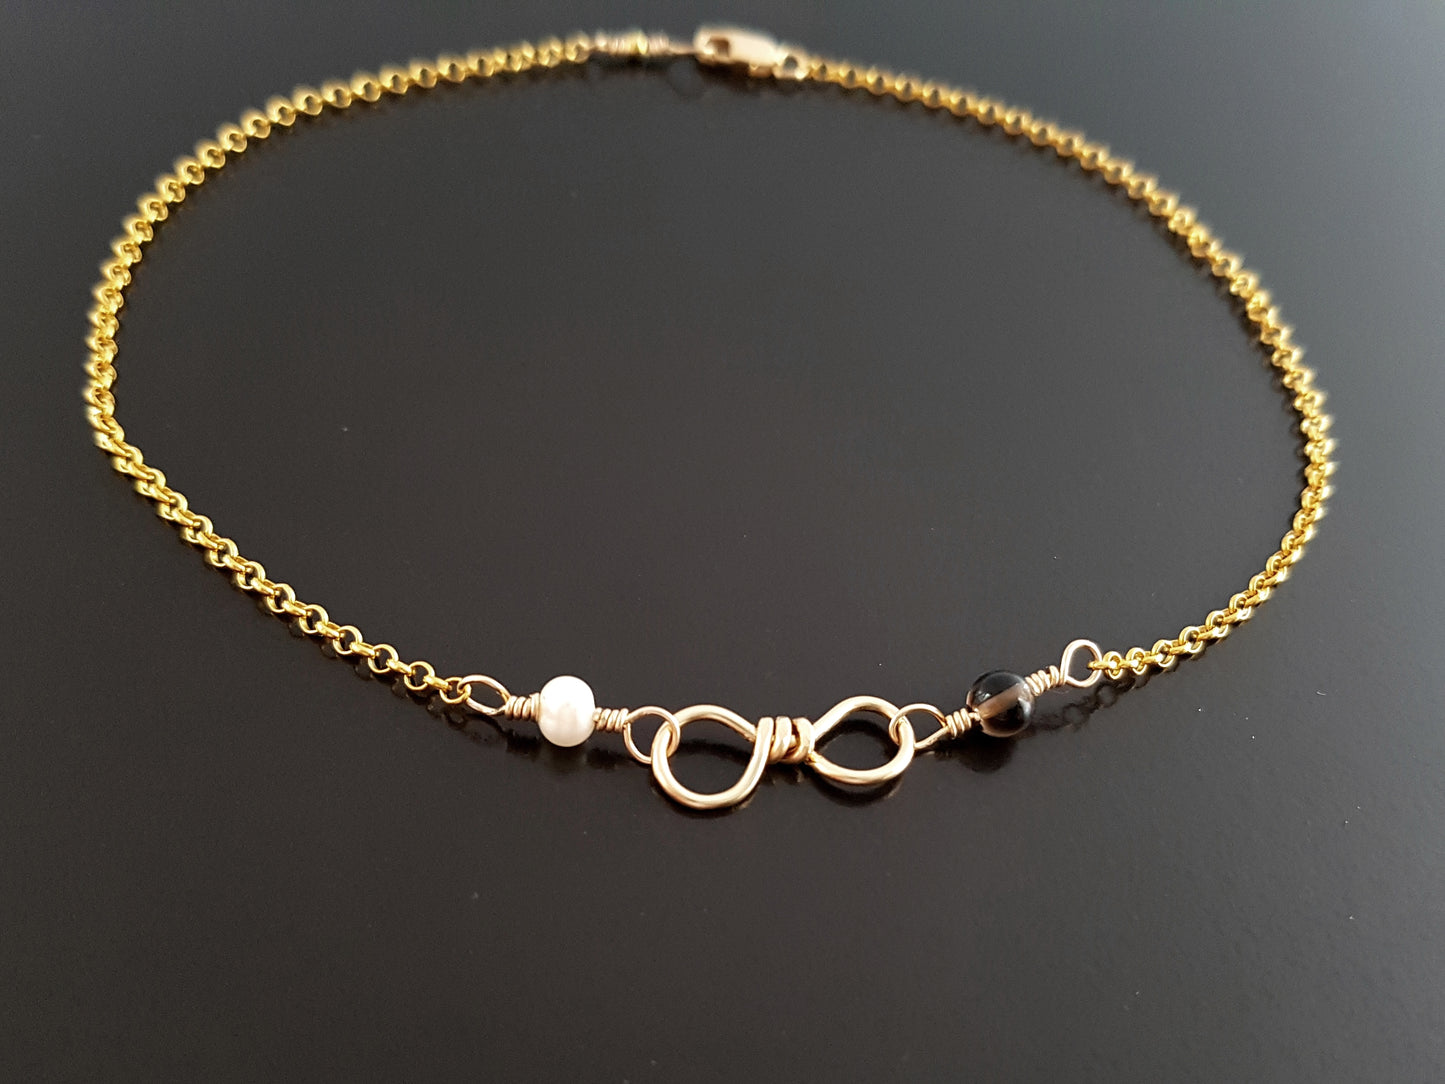 Golden Infinity Birthstone Anklet-Ankle Bracelet, 14k Gold filled Hand Forged Infinity pendant with two Birthstones, attached to rolo chain and fasten with lobster claw clasp. 